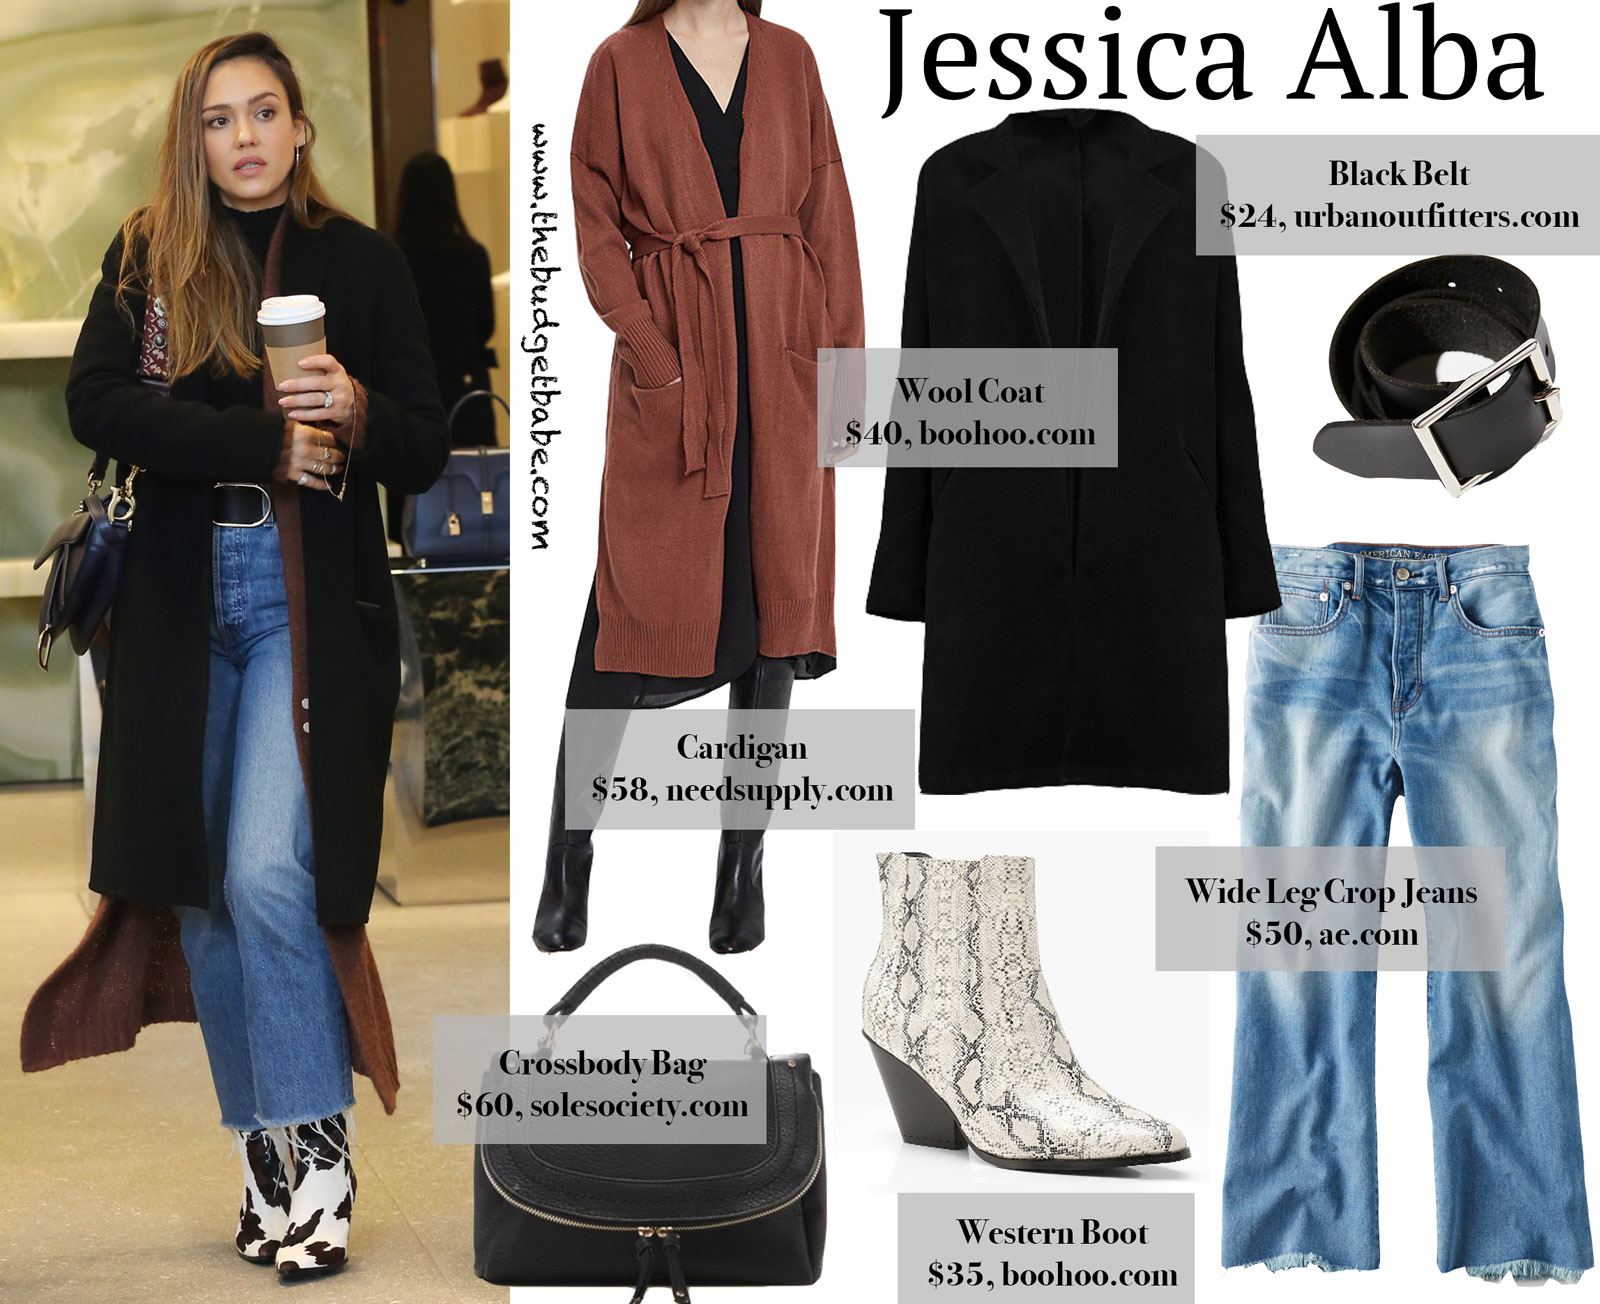 Jessica Alba's MANGO Western Boots Look for Less